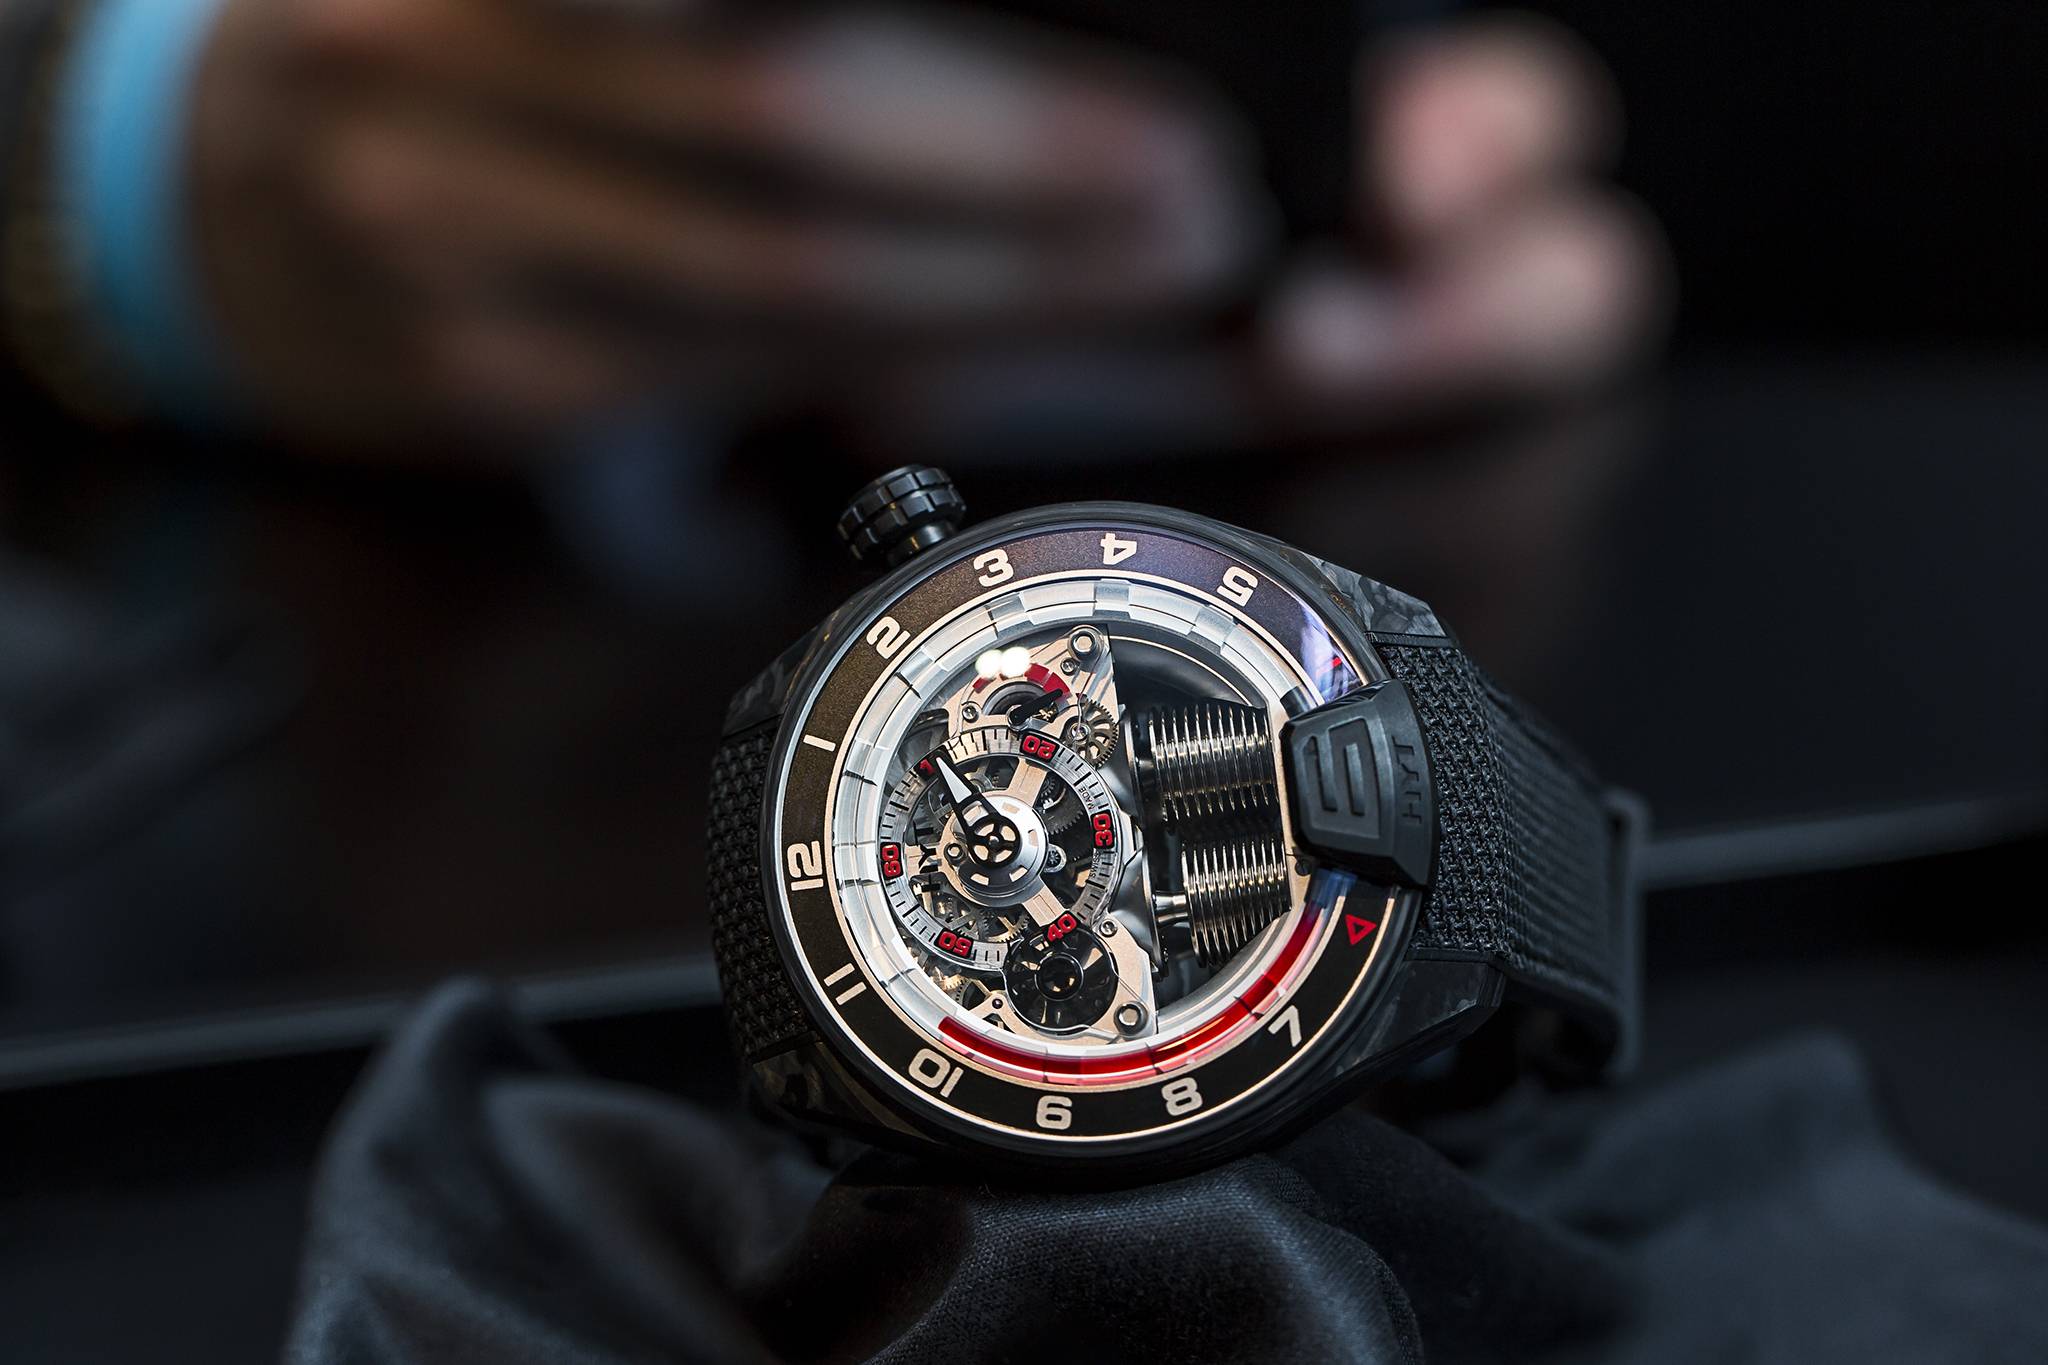 Introducing The HYT H4 Gotham, A Hydro Mechanical Watch Featuring An Exclusive Skeleton Movement